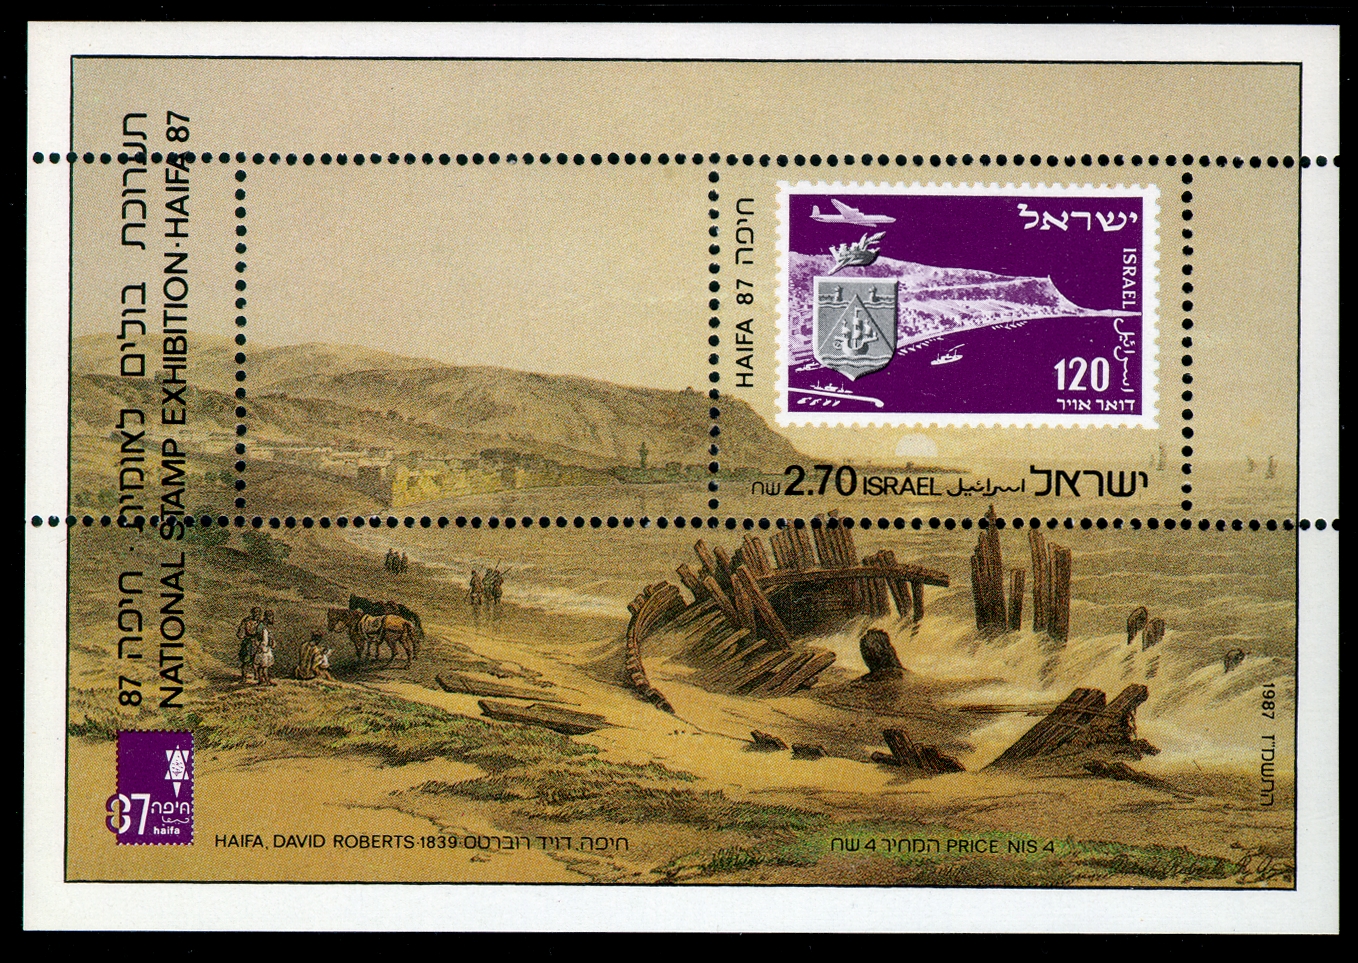 http://static.israelphilately.org.il/images/stamps/100_L.jpg